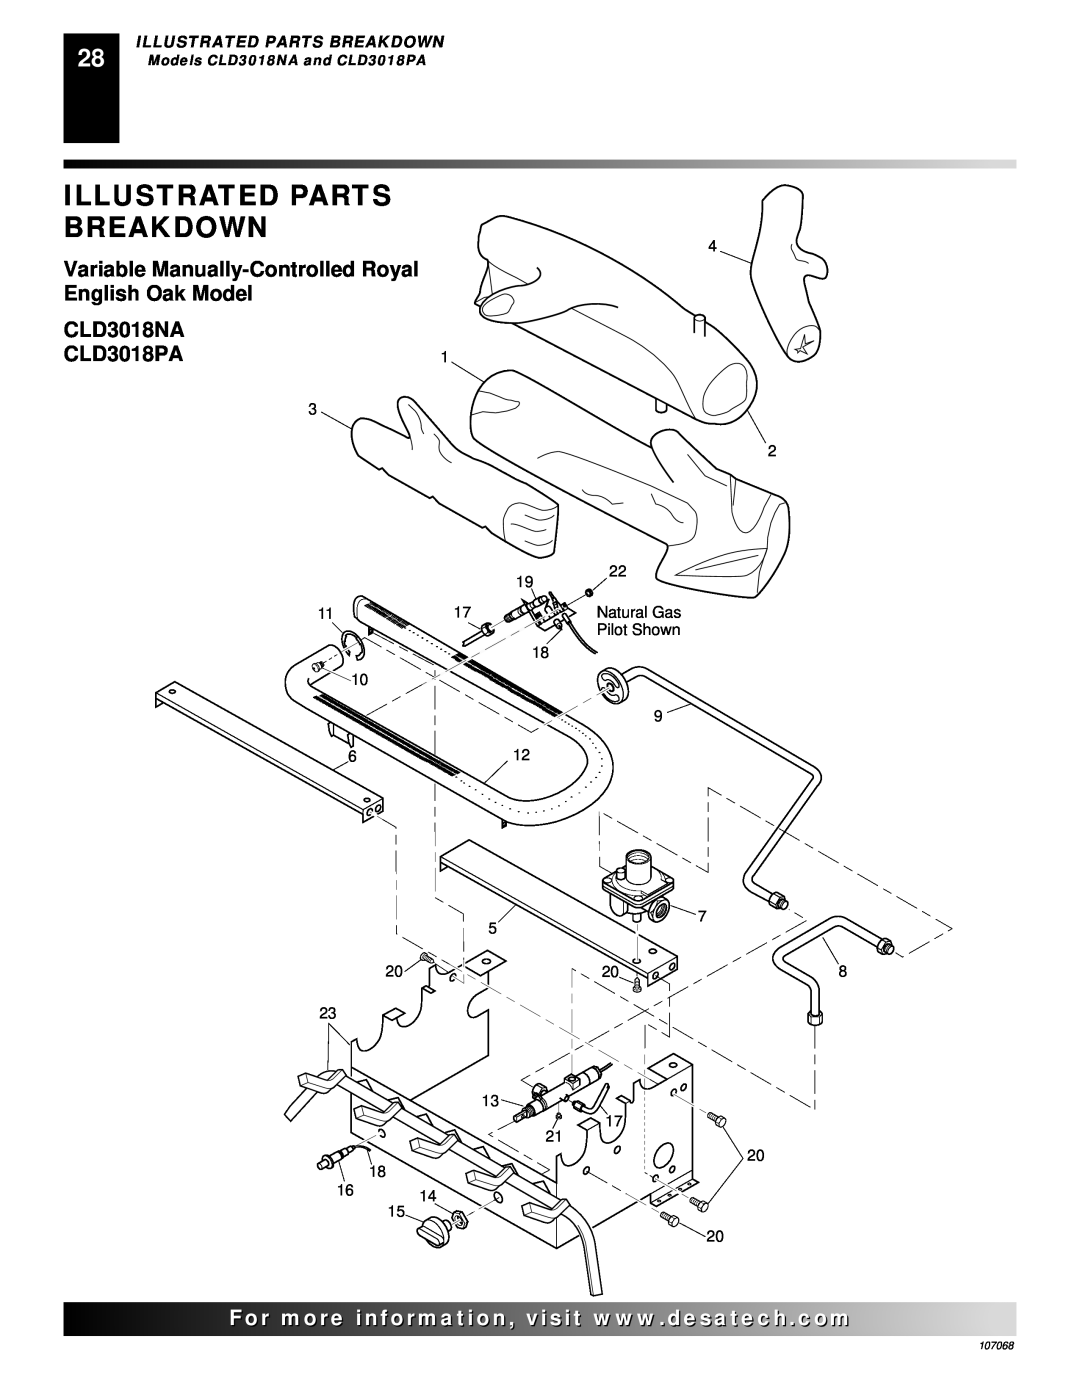 Desa CGS3124N installation manual CLD3018NA CLD3018PA, Illustrated Parts Breakdown, Models CLD3018NA and CLD3018PA, 107068 